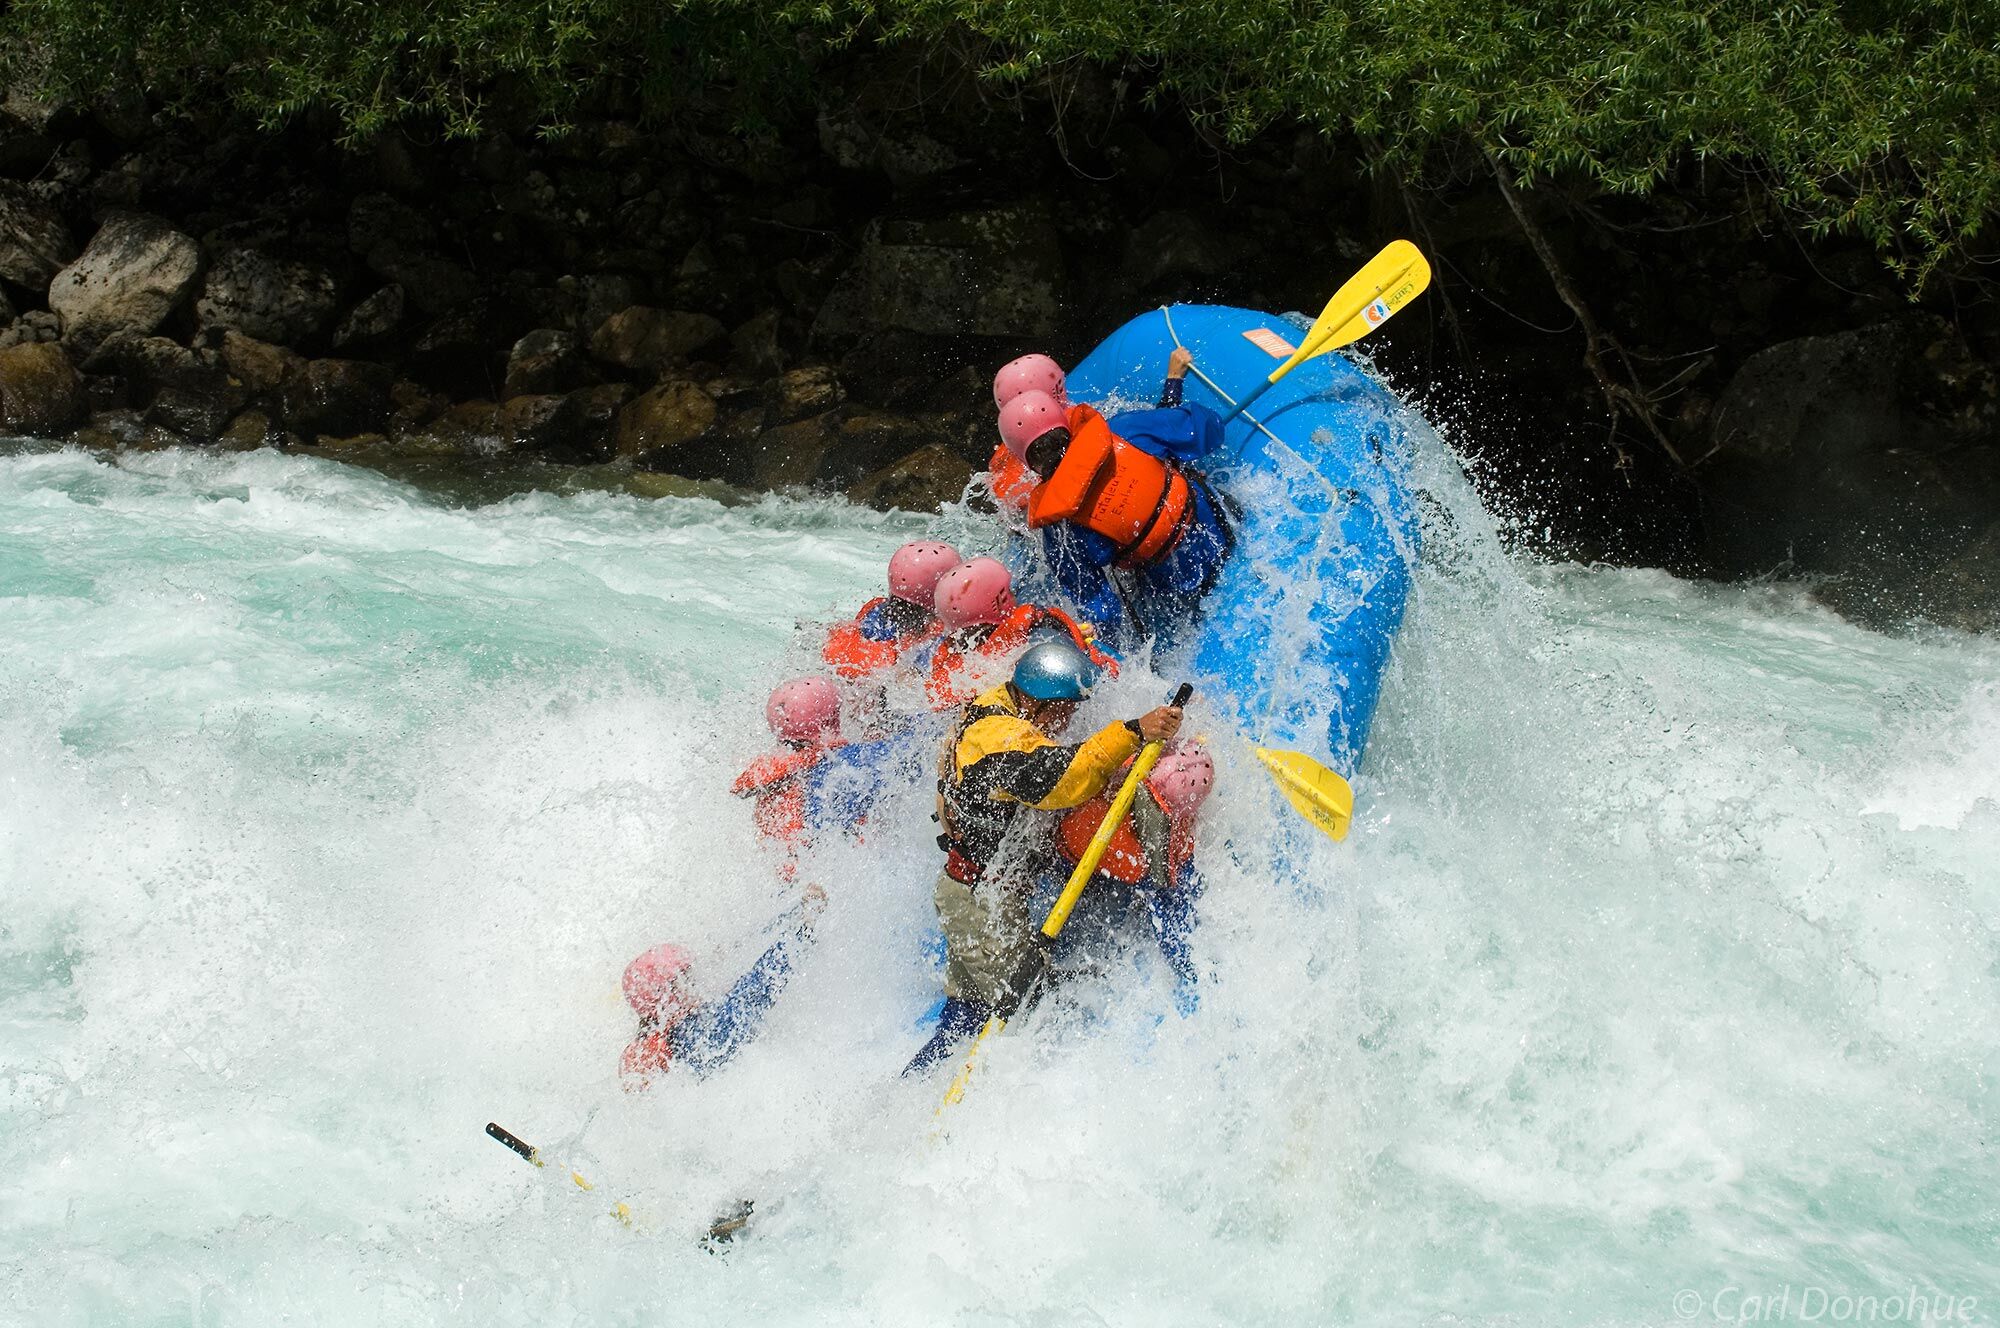 Whitewater rafting on the Futaleufu River. The Bridge to Bridge section, Puente a Puente. Rafting a Class IV whitewater rapid...